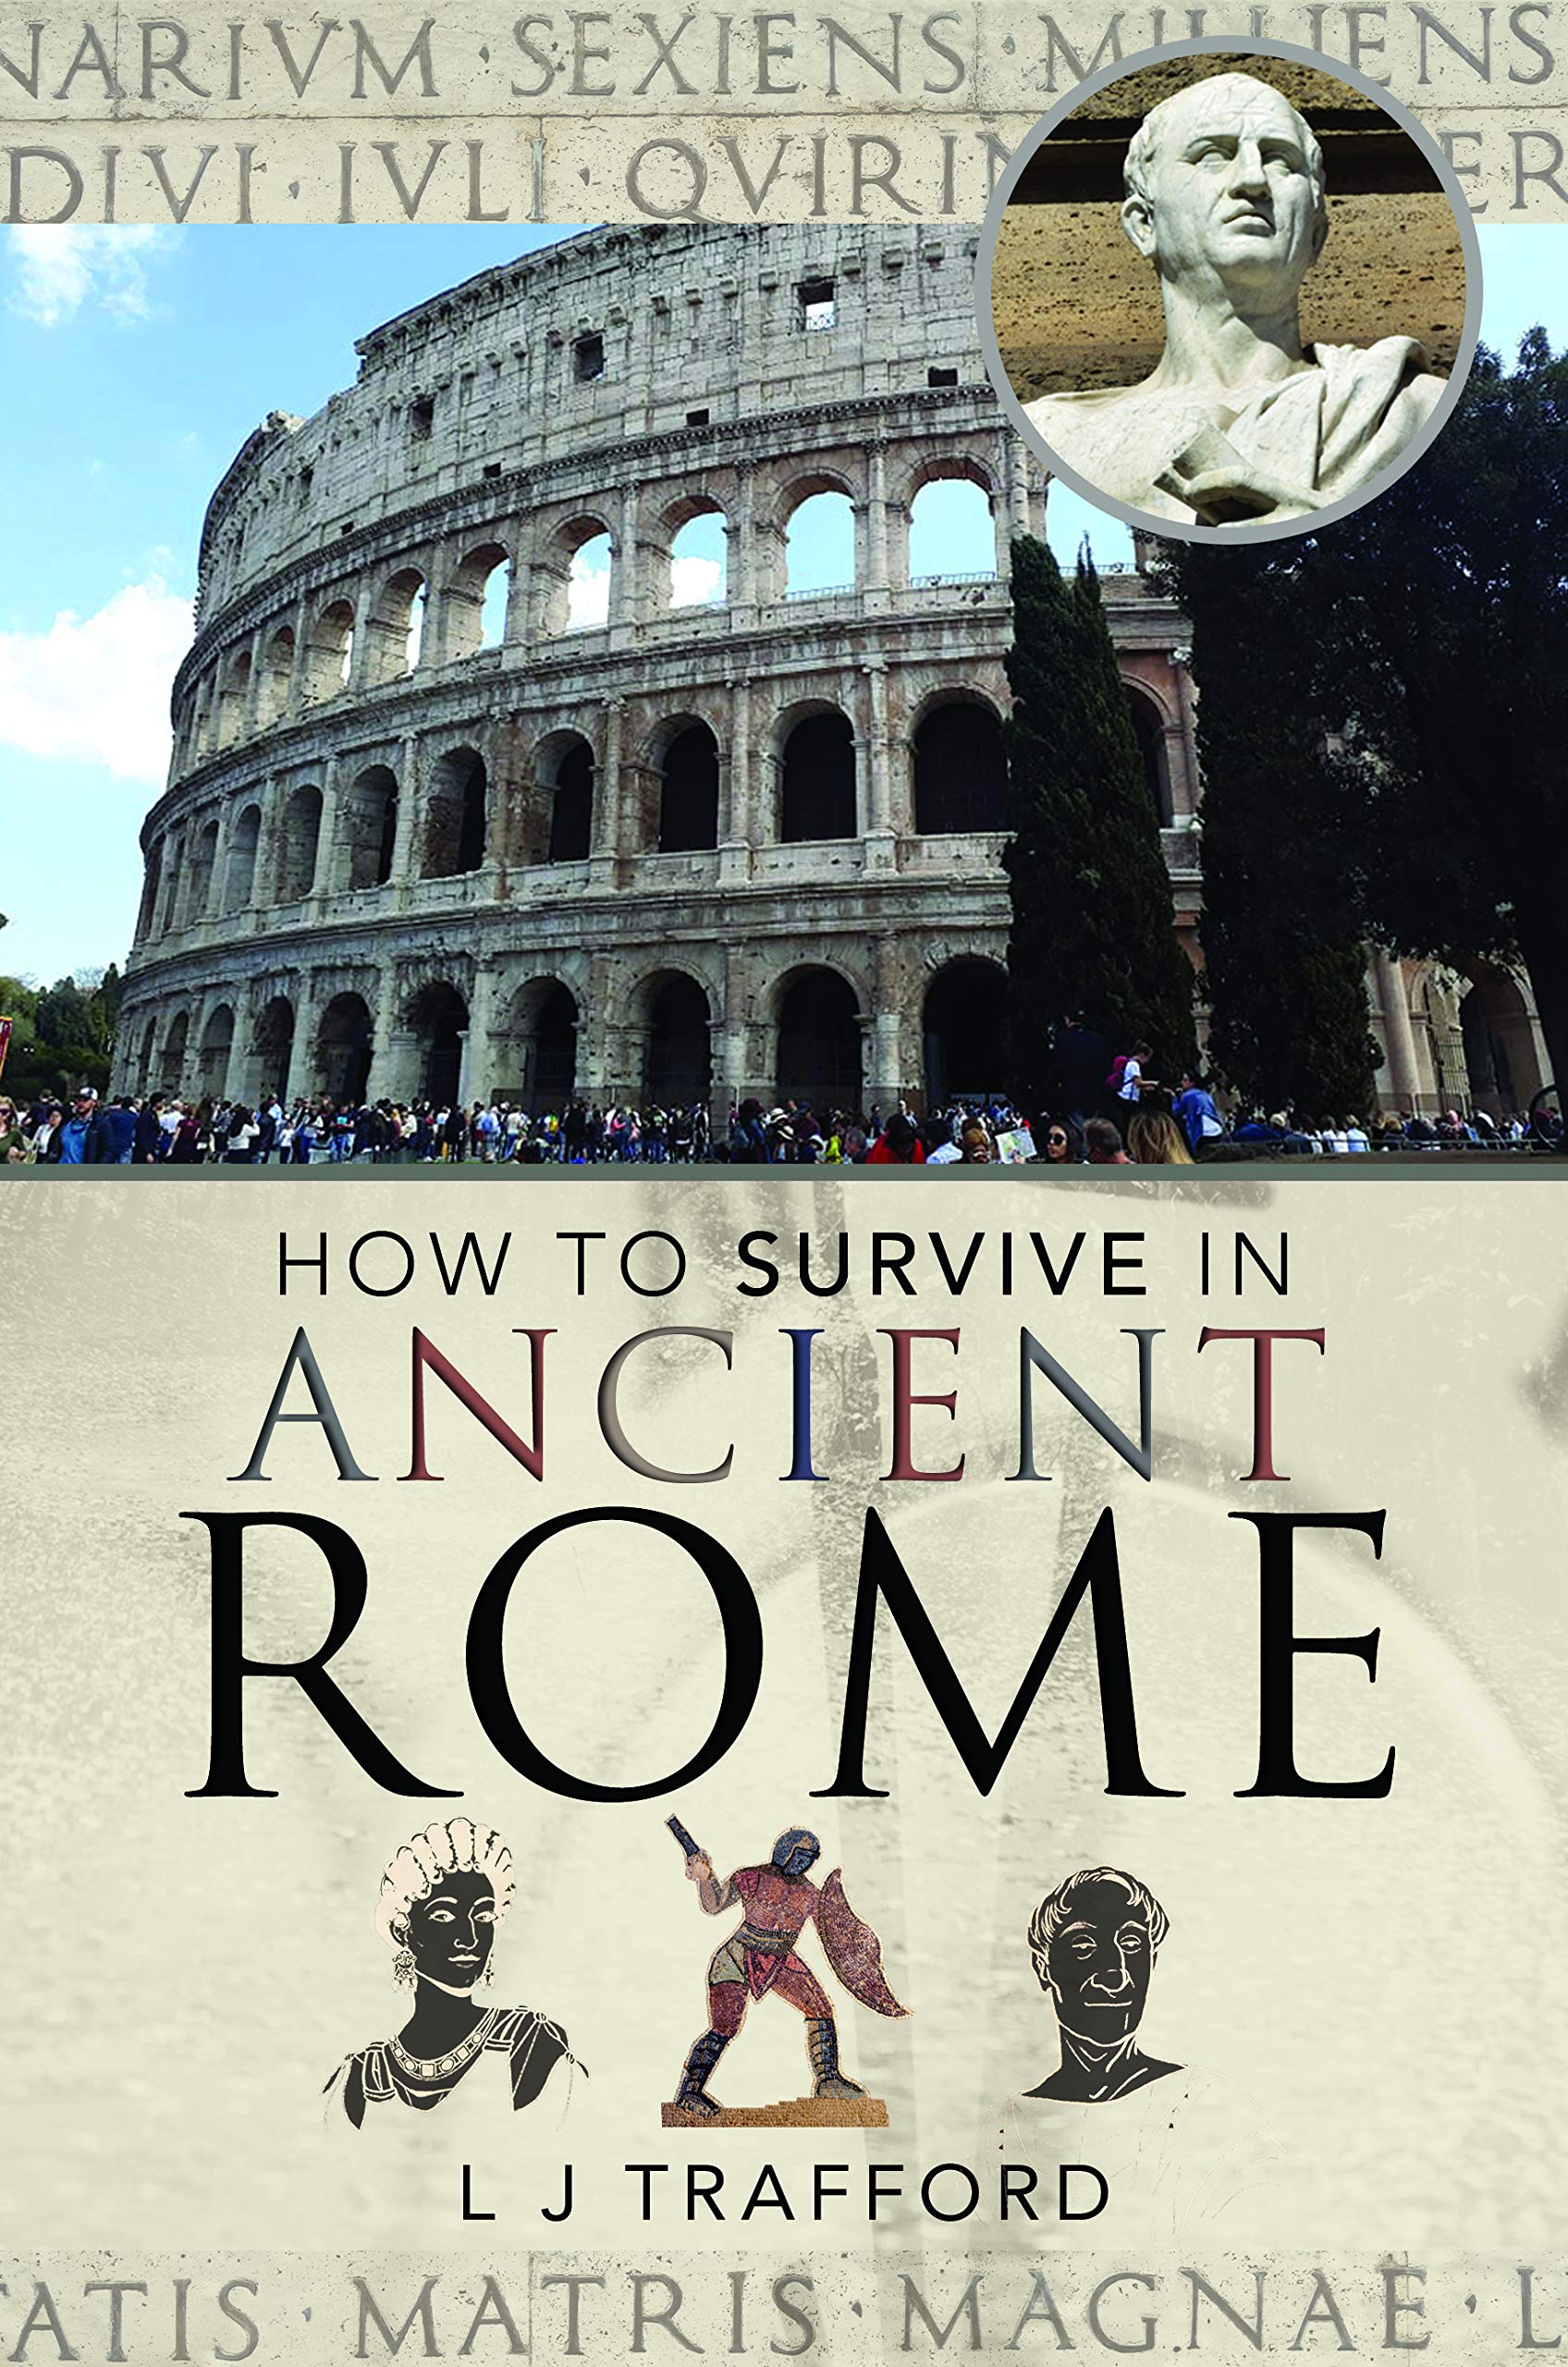 “How to Survive in Ancient Rome”, de L J Trafford